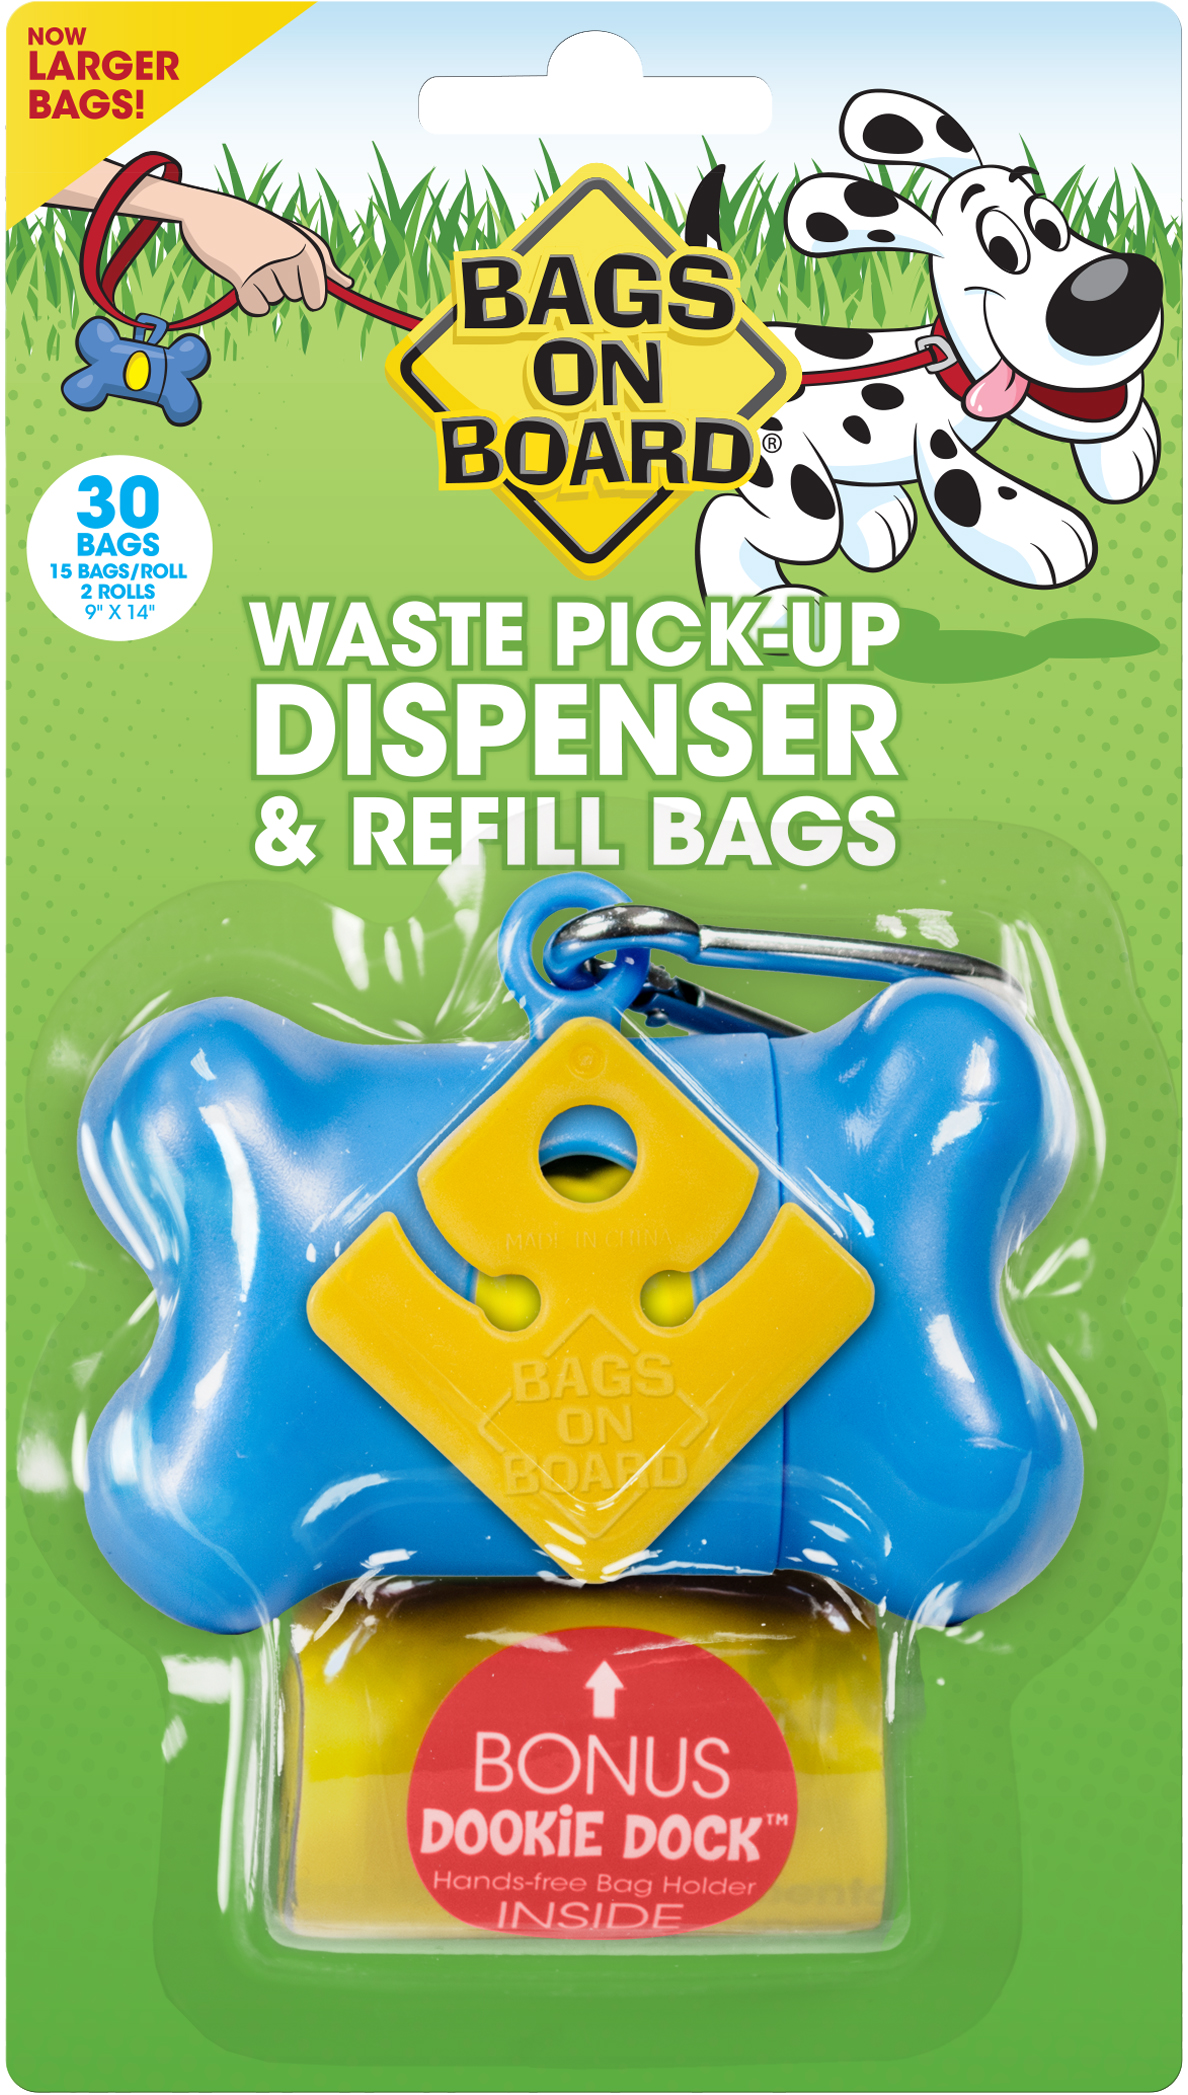 Bags on Board Dog Waste Bag Bone Dispenser with 30 Refill Bags